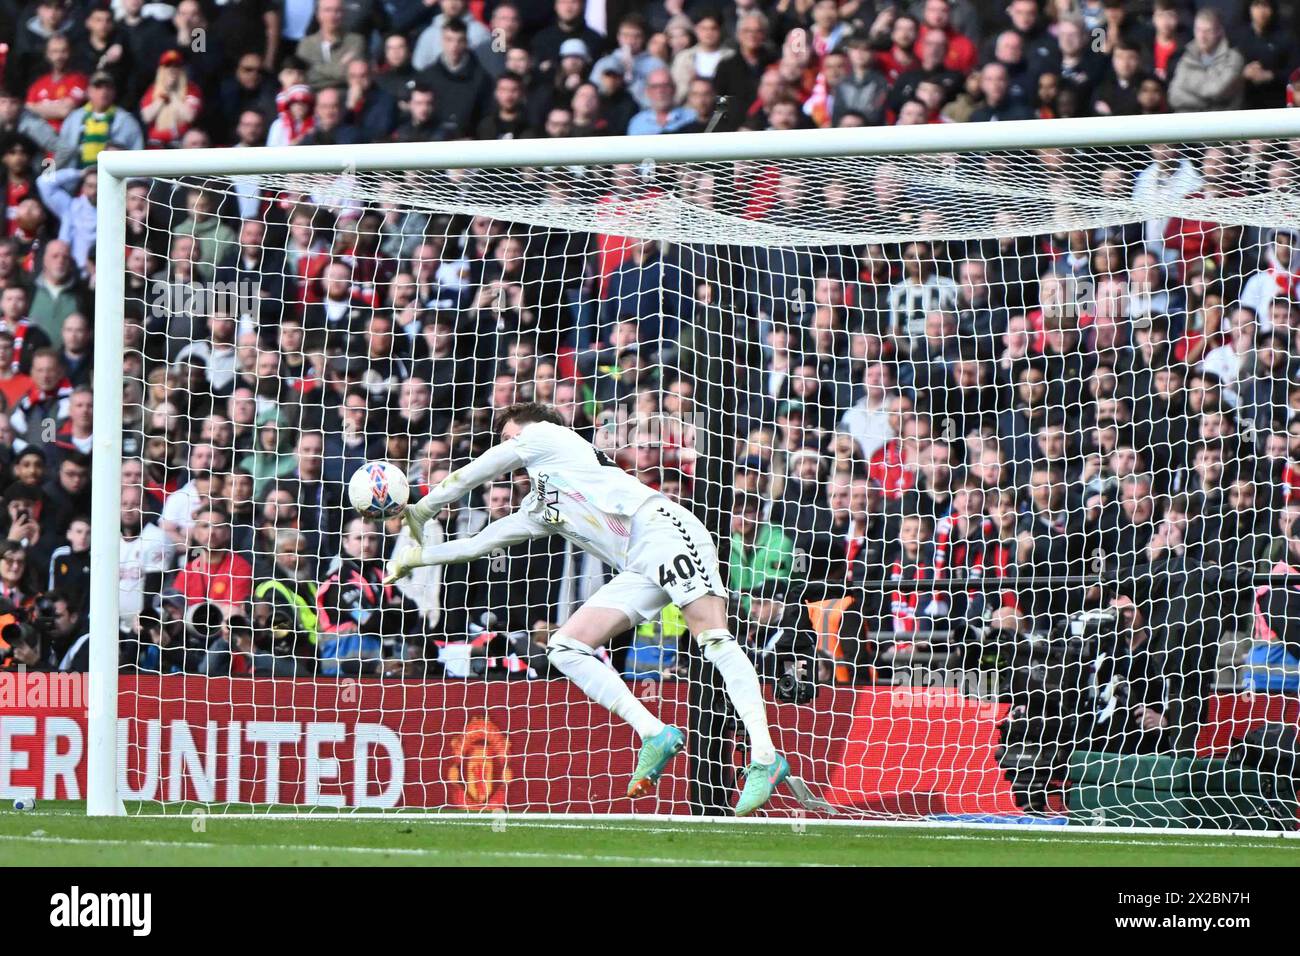 Wembley Stadium, London on Sunday 21st April 2024. Goalkeeper Bradley Collins (40 Coventry City) saves Casemiro (18 Manchester United) penalty during the FA Cup Semi Final match between Coventry City and Manchester City at Wembley Stadium, London on Sunday 21st April 2024. (Photo: Kevin Hodgson | MI News) Credit: MI News & Sport /Alamy Live News Stock Photo